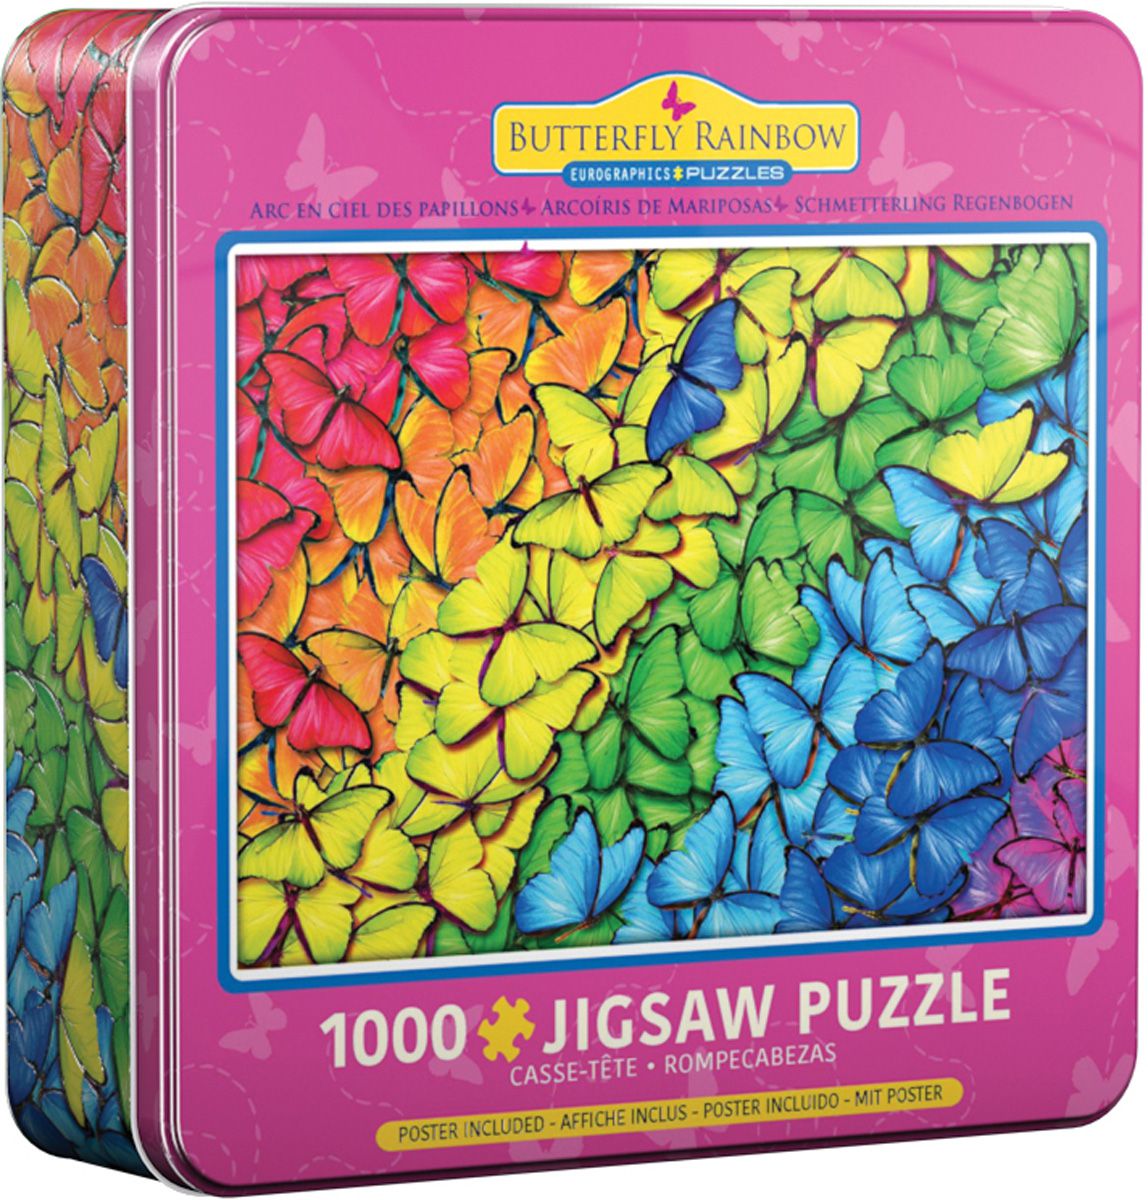  Eurographics Puzzle 1000 Teile - Butterfly Rainbow in Puzzledose 